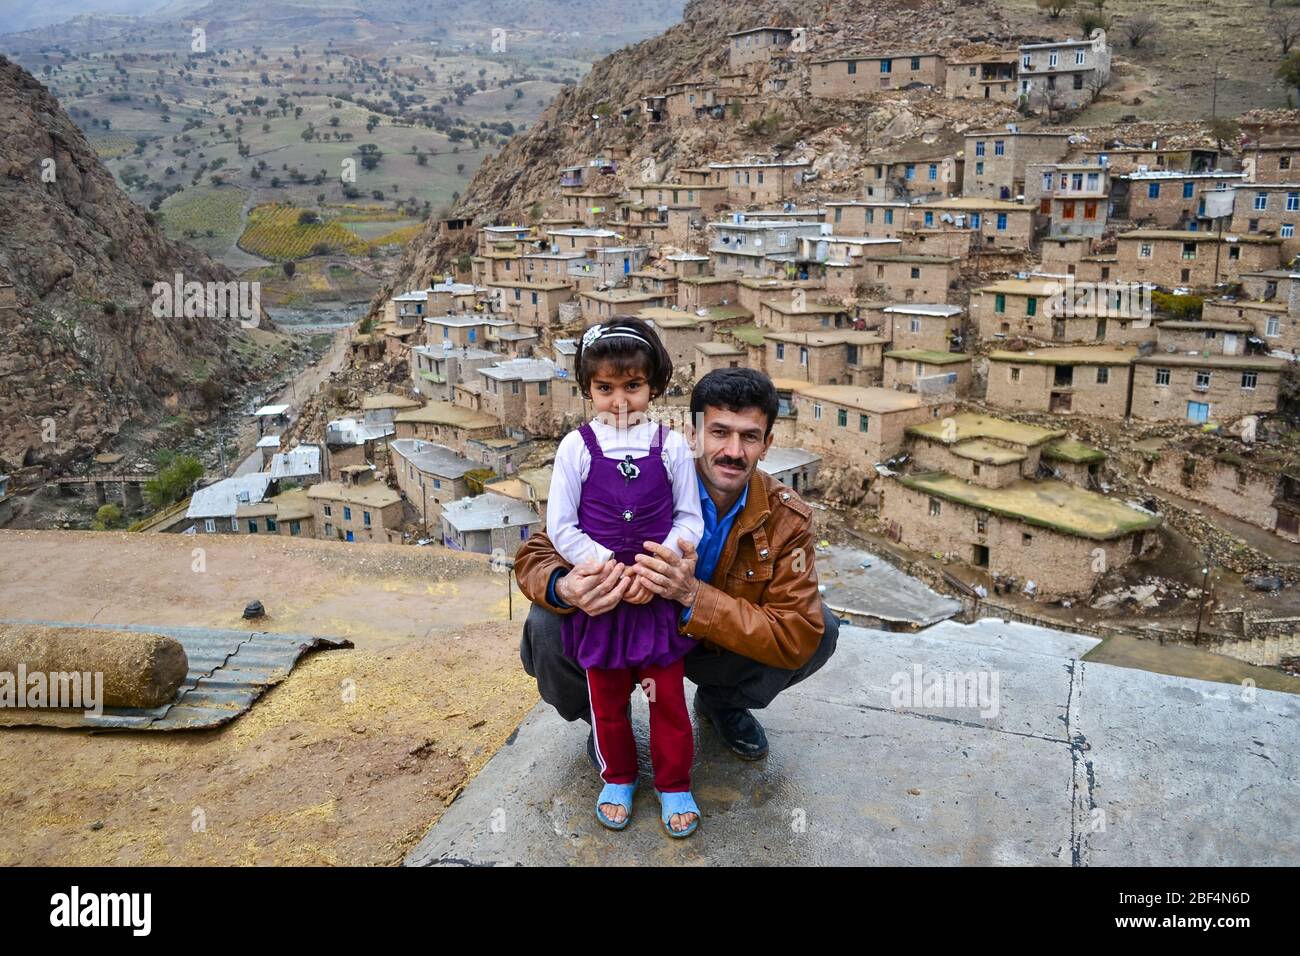 Palangan, Iranian Kurdistan - November 15, 2013: Portrait of cute and little Kurdish girl huged by her father while posing with Palangan stone village in the background Stock Photo